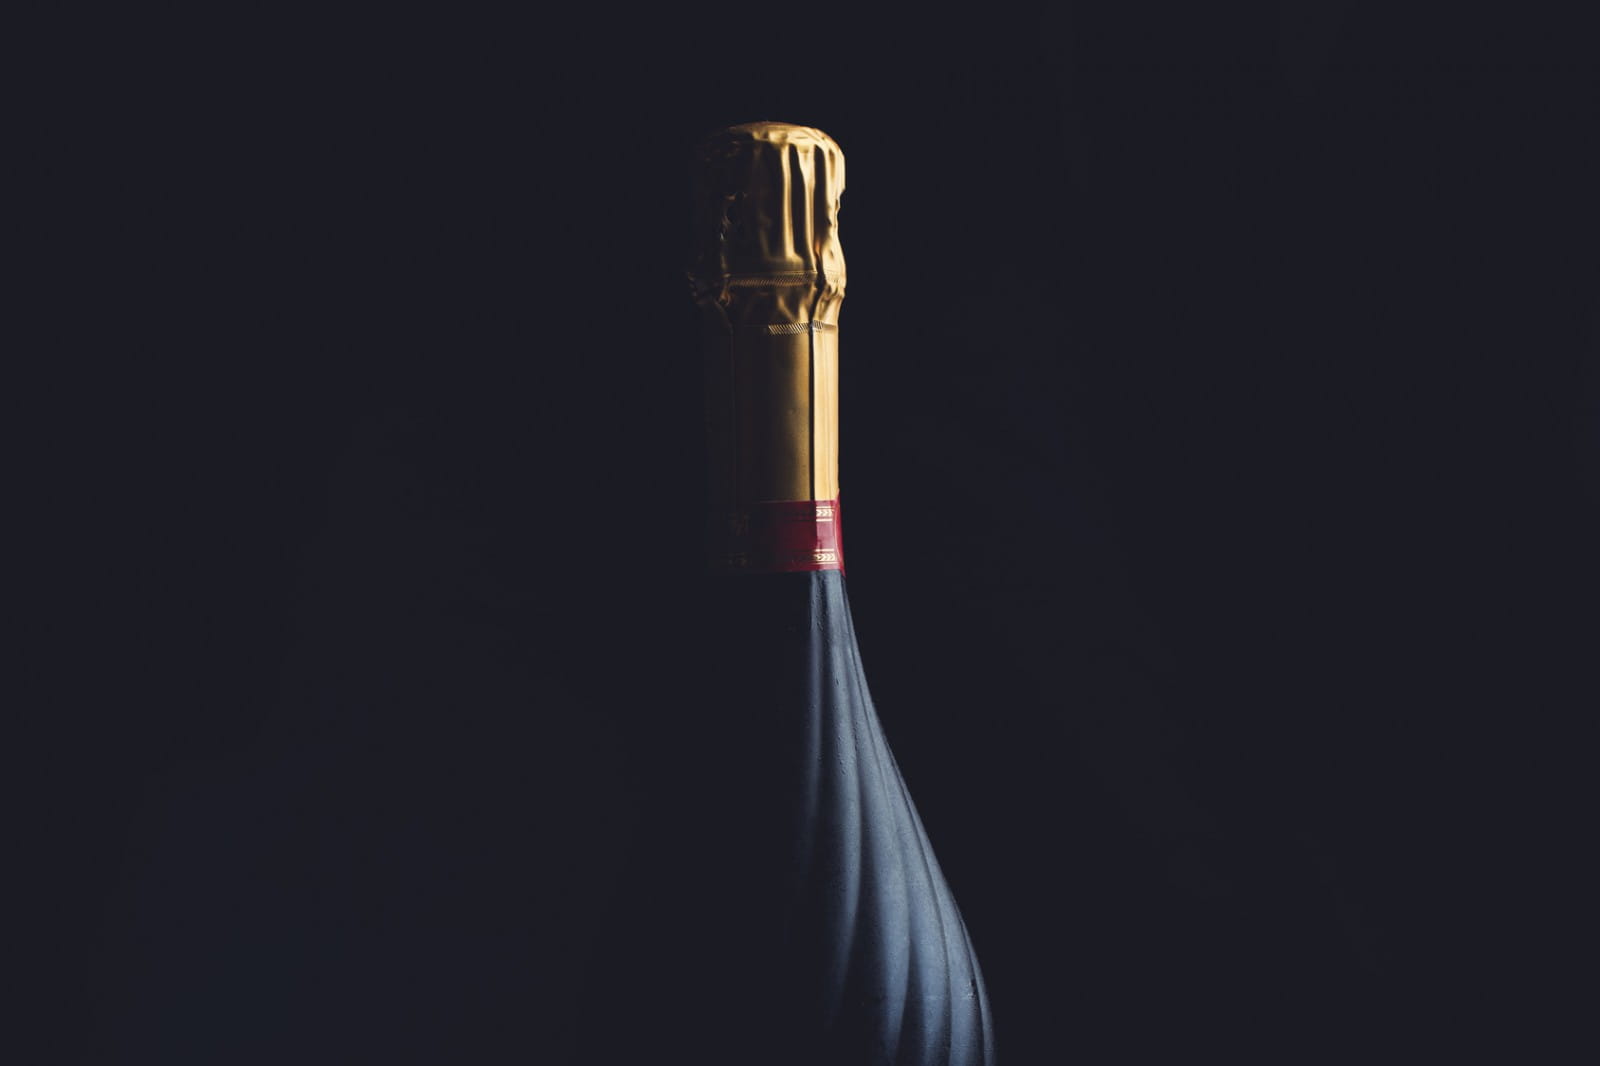 10 things you possibly didn’t know about champagne